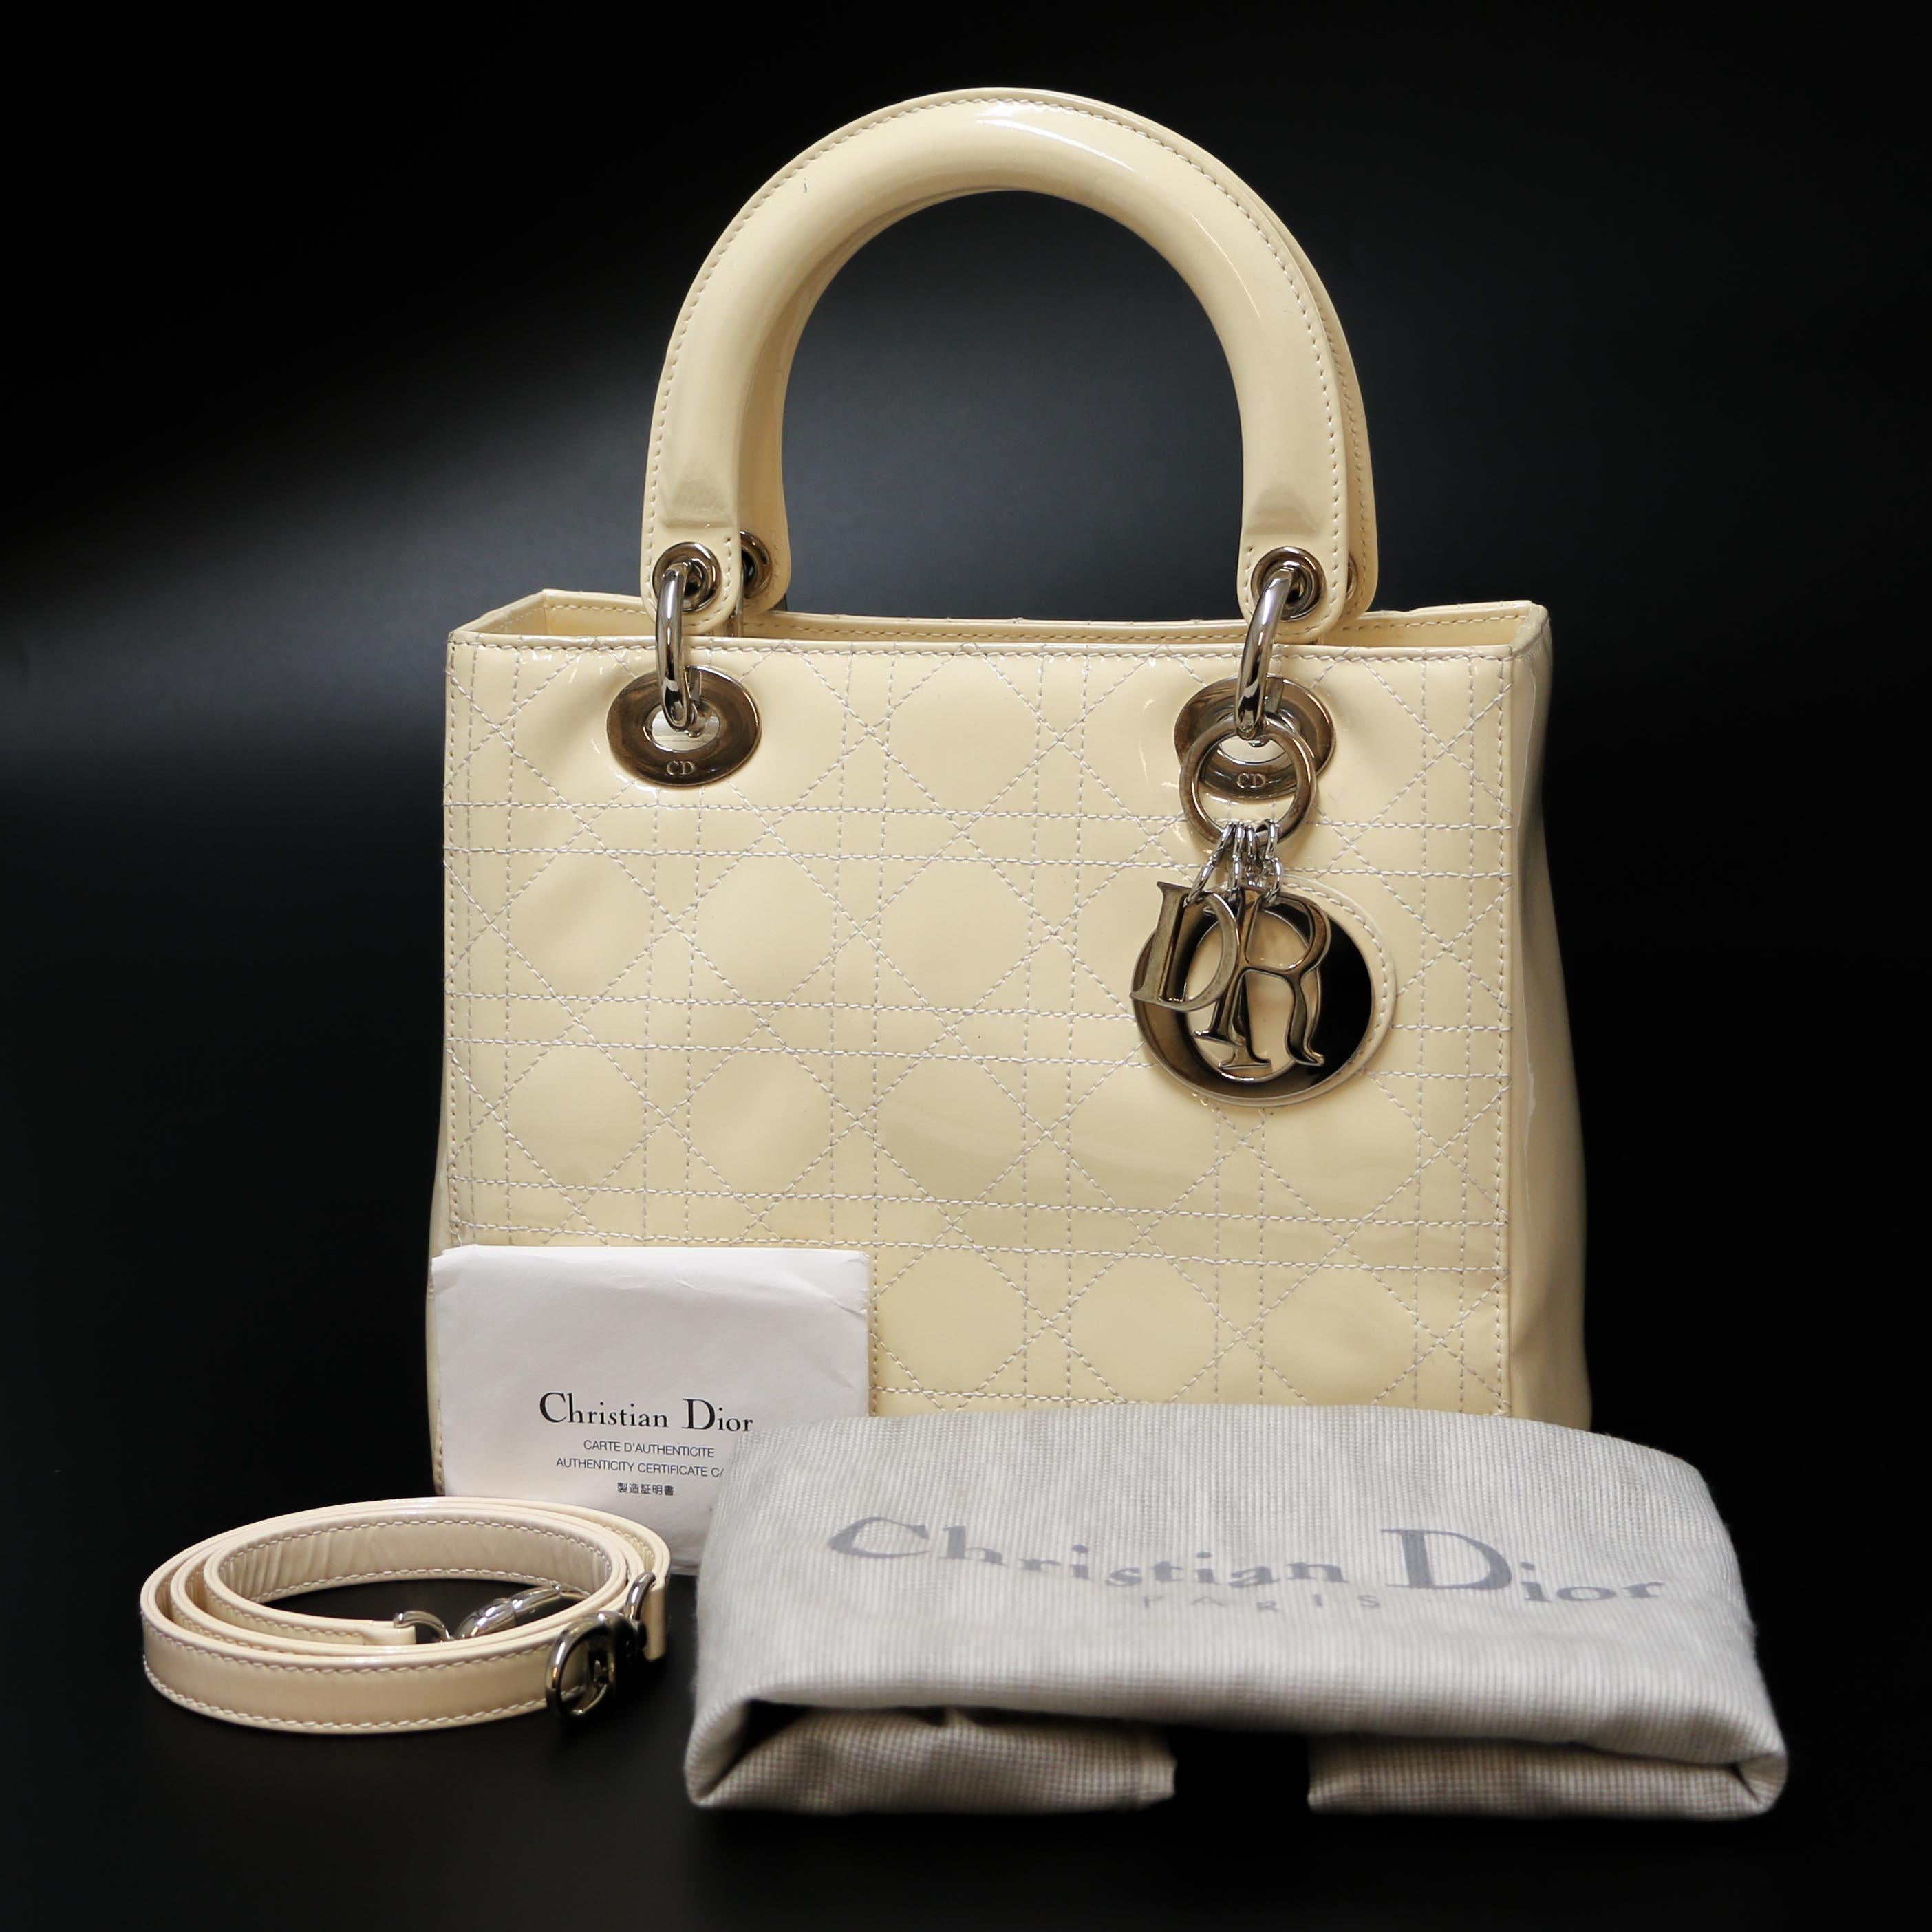 Lady DIOR Bag Patent Leather 6